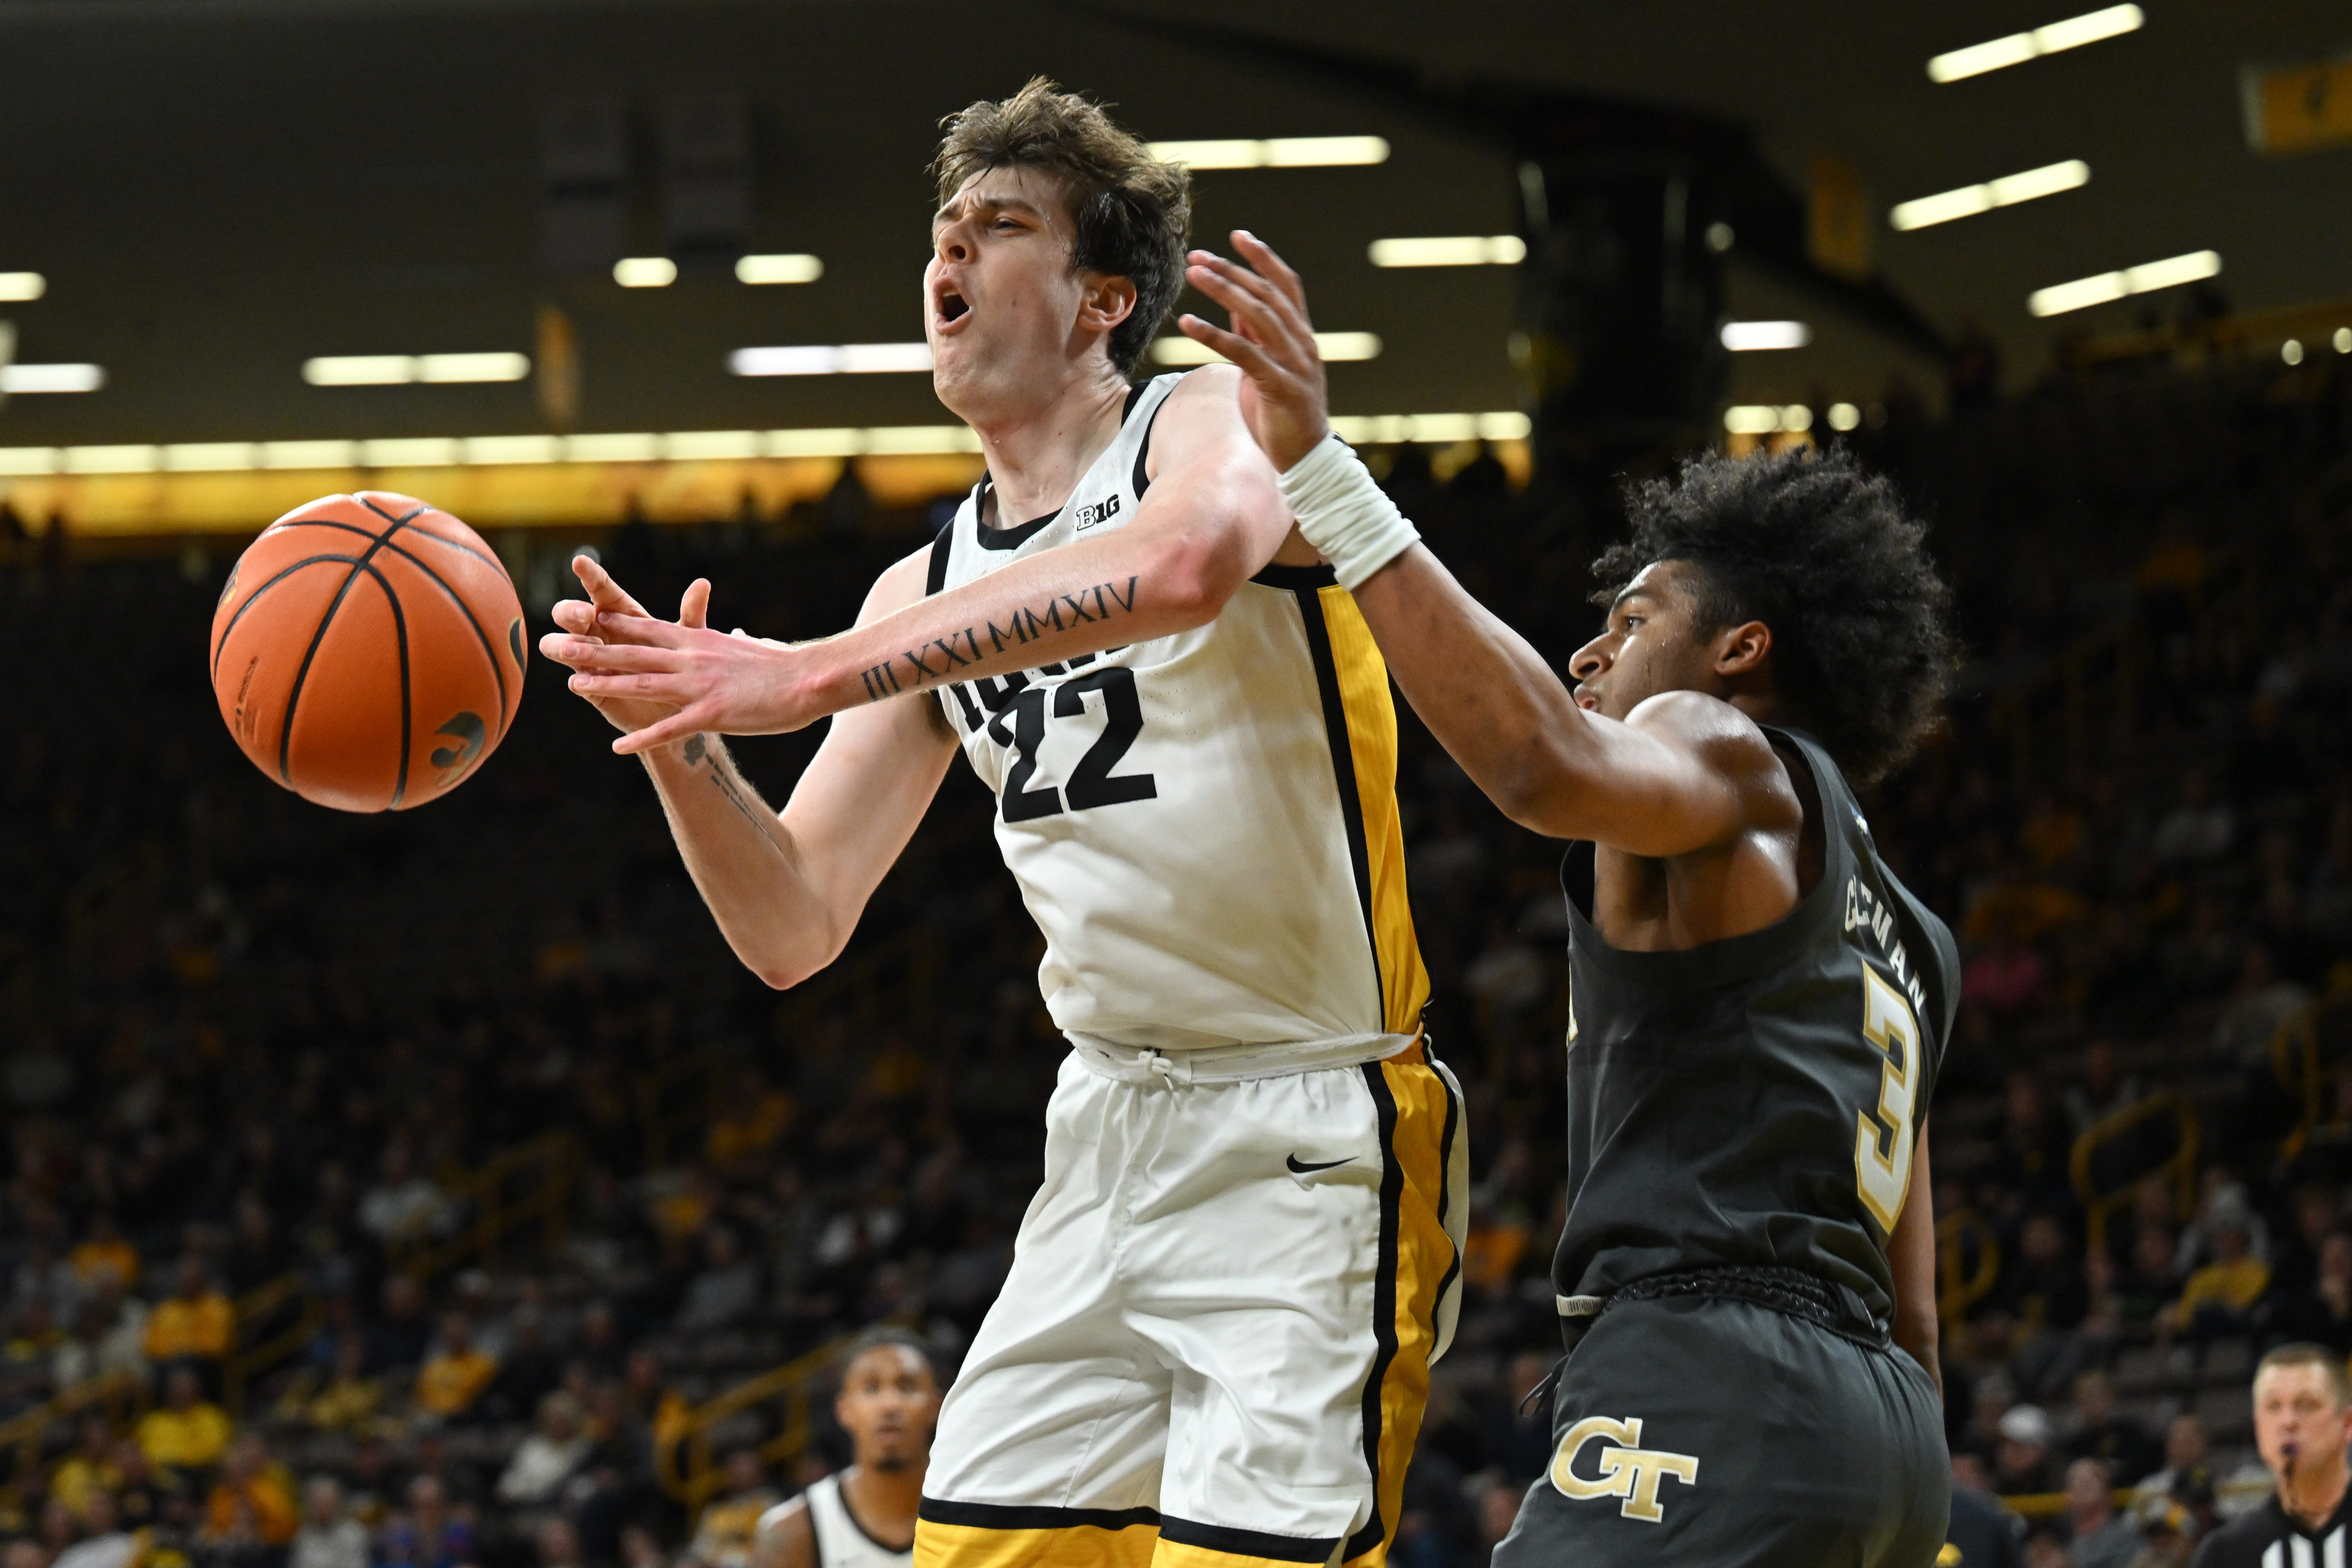 Iowa forward Patrick McCaffery (22) is defended by Georgia Tech guard Dallan Coleman (3) during the second half of an NCAA college basketball game, Tuesday, Nov. 29, 2022, in Iowa City, Iowa.